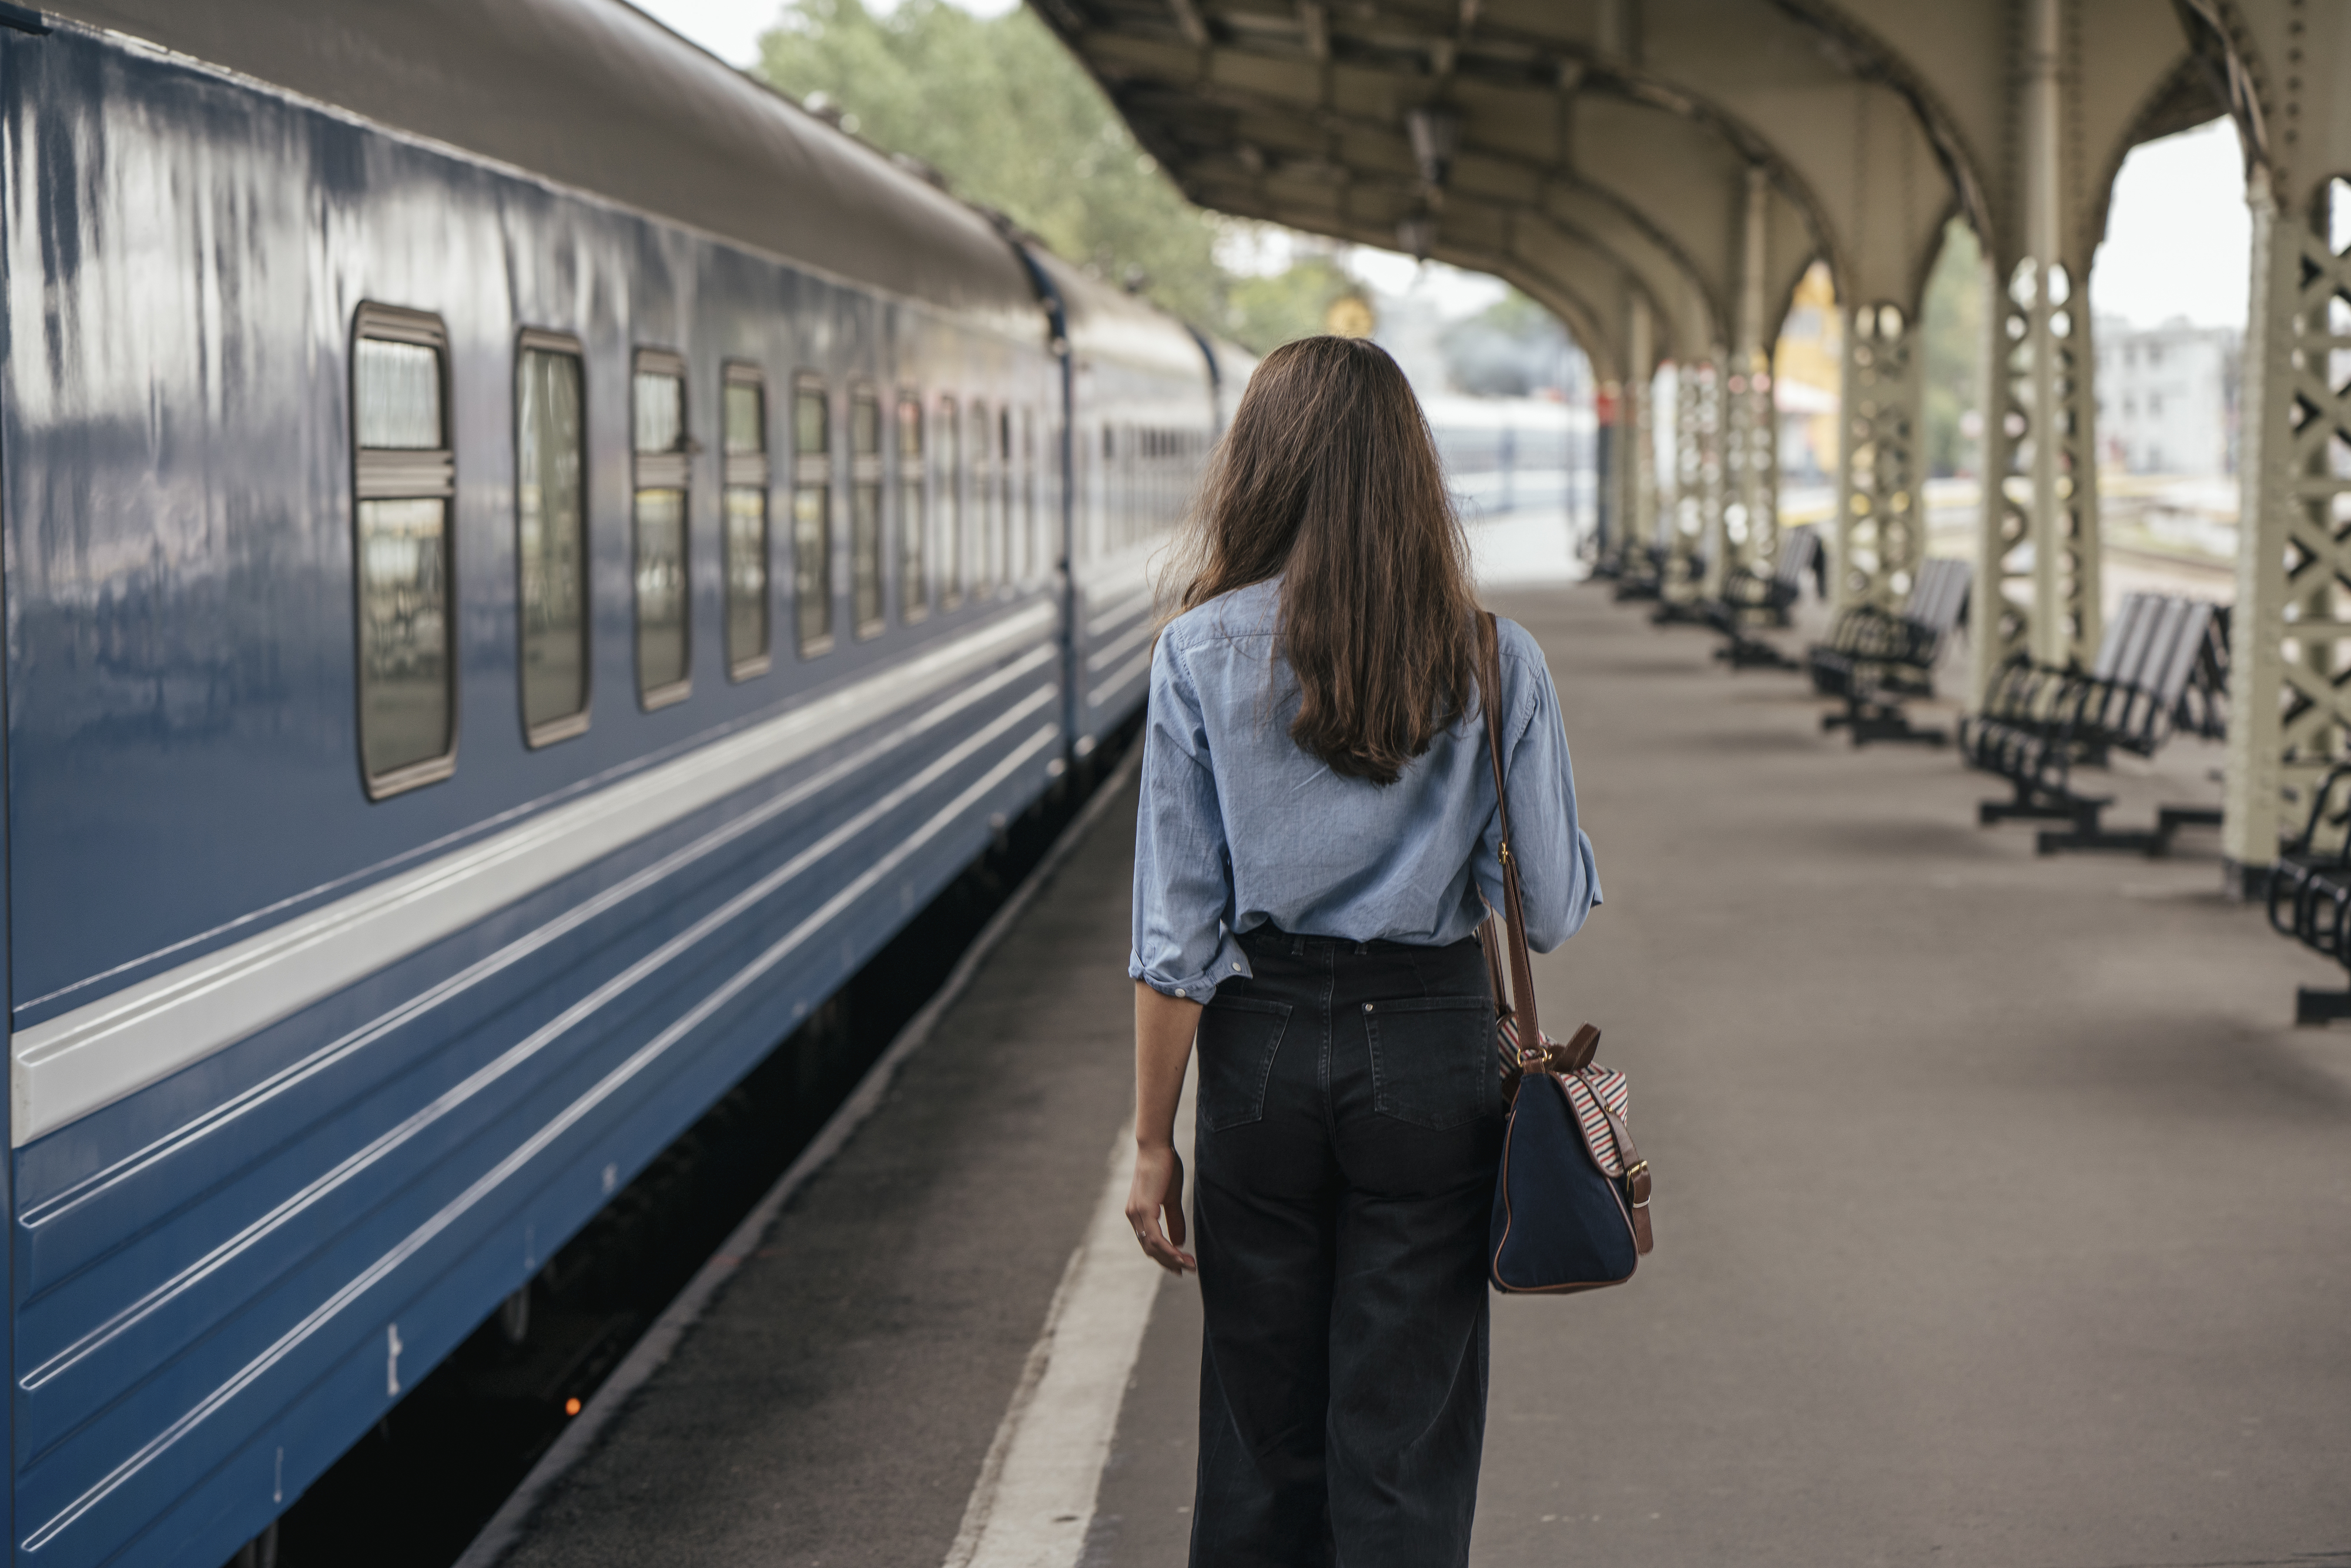 Woman standing on a train platform with her back to the camera, looking towards a train